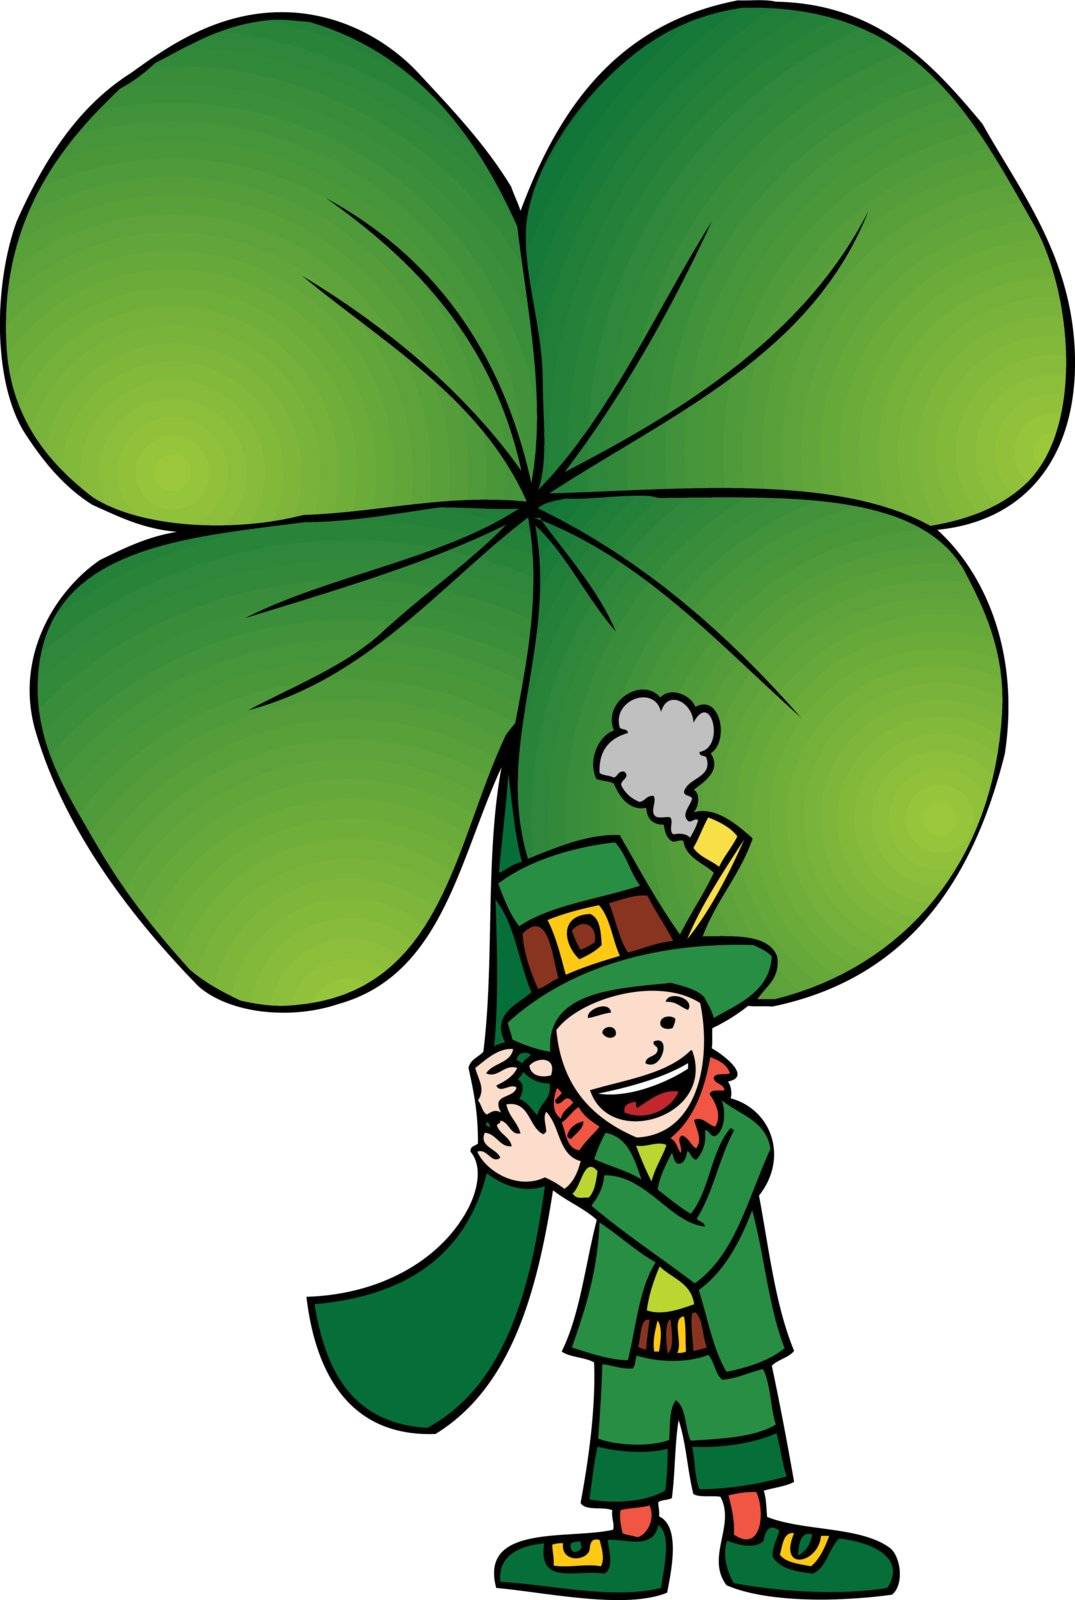 Image of a Leprechaun and four-leaf clover.